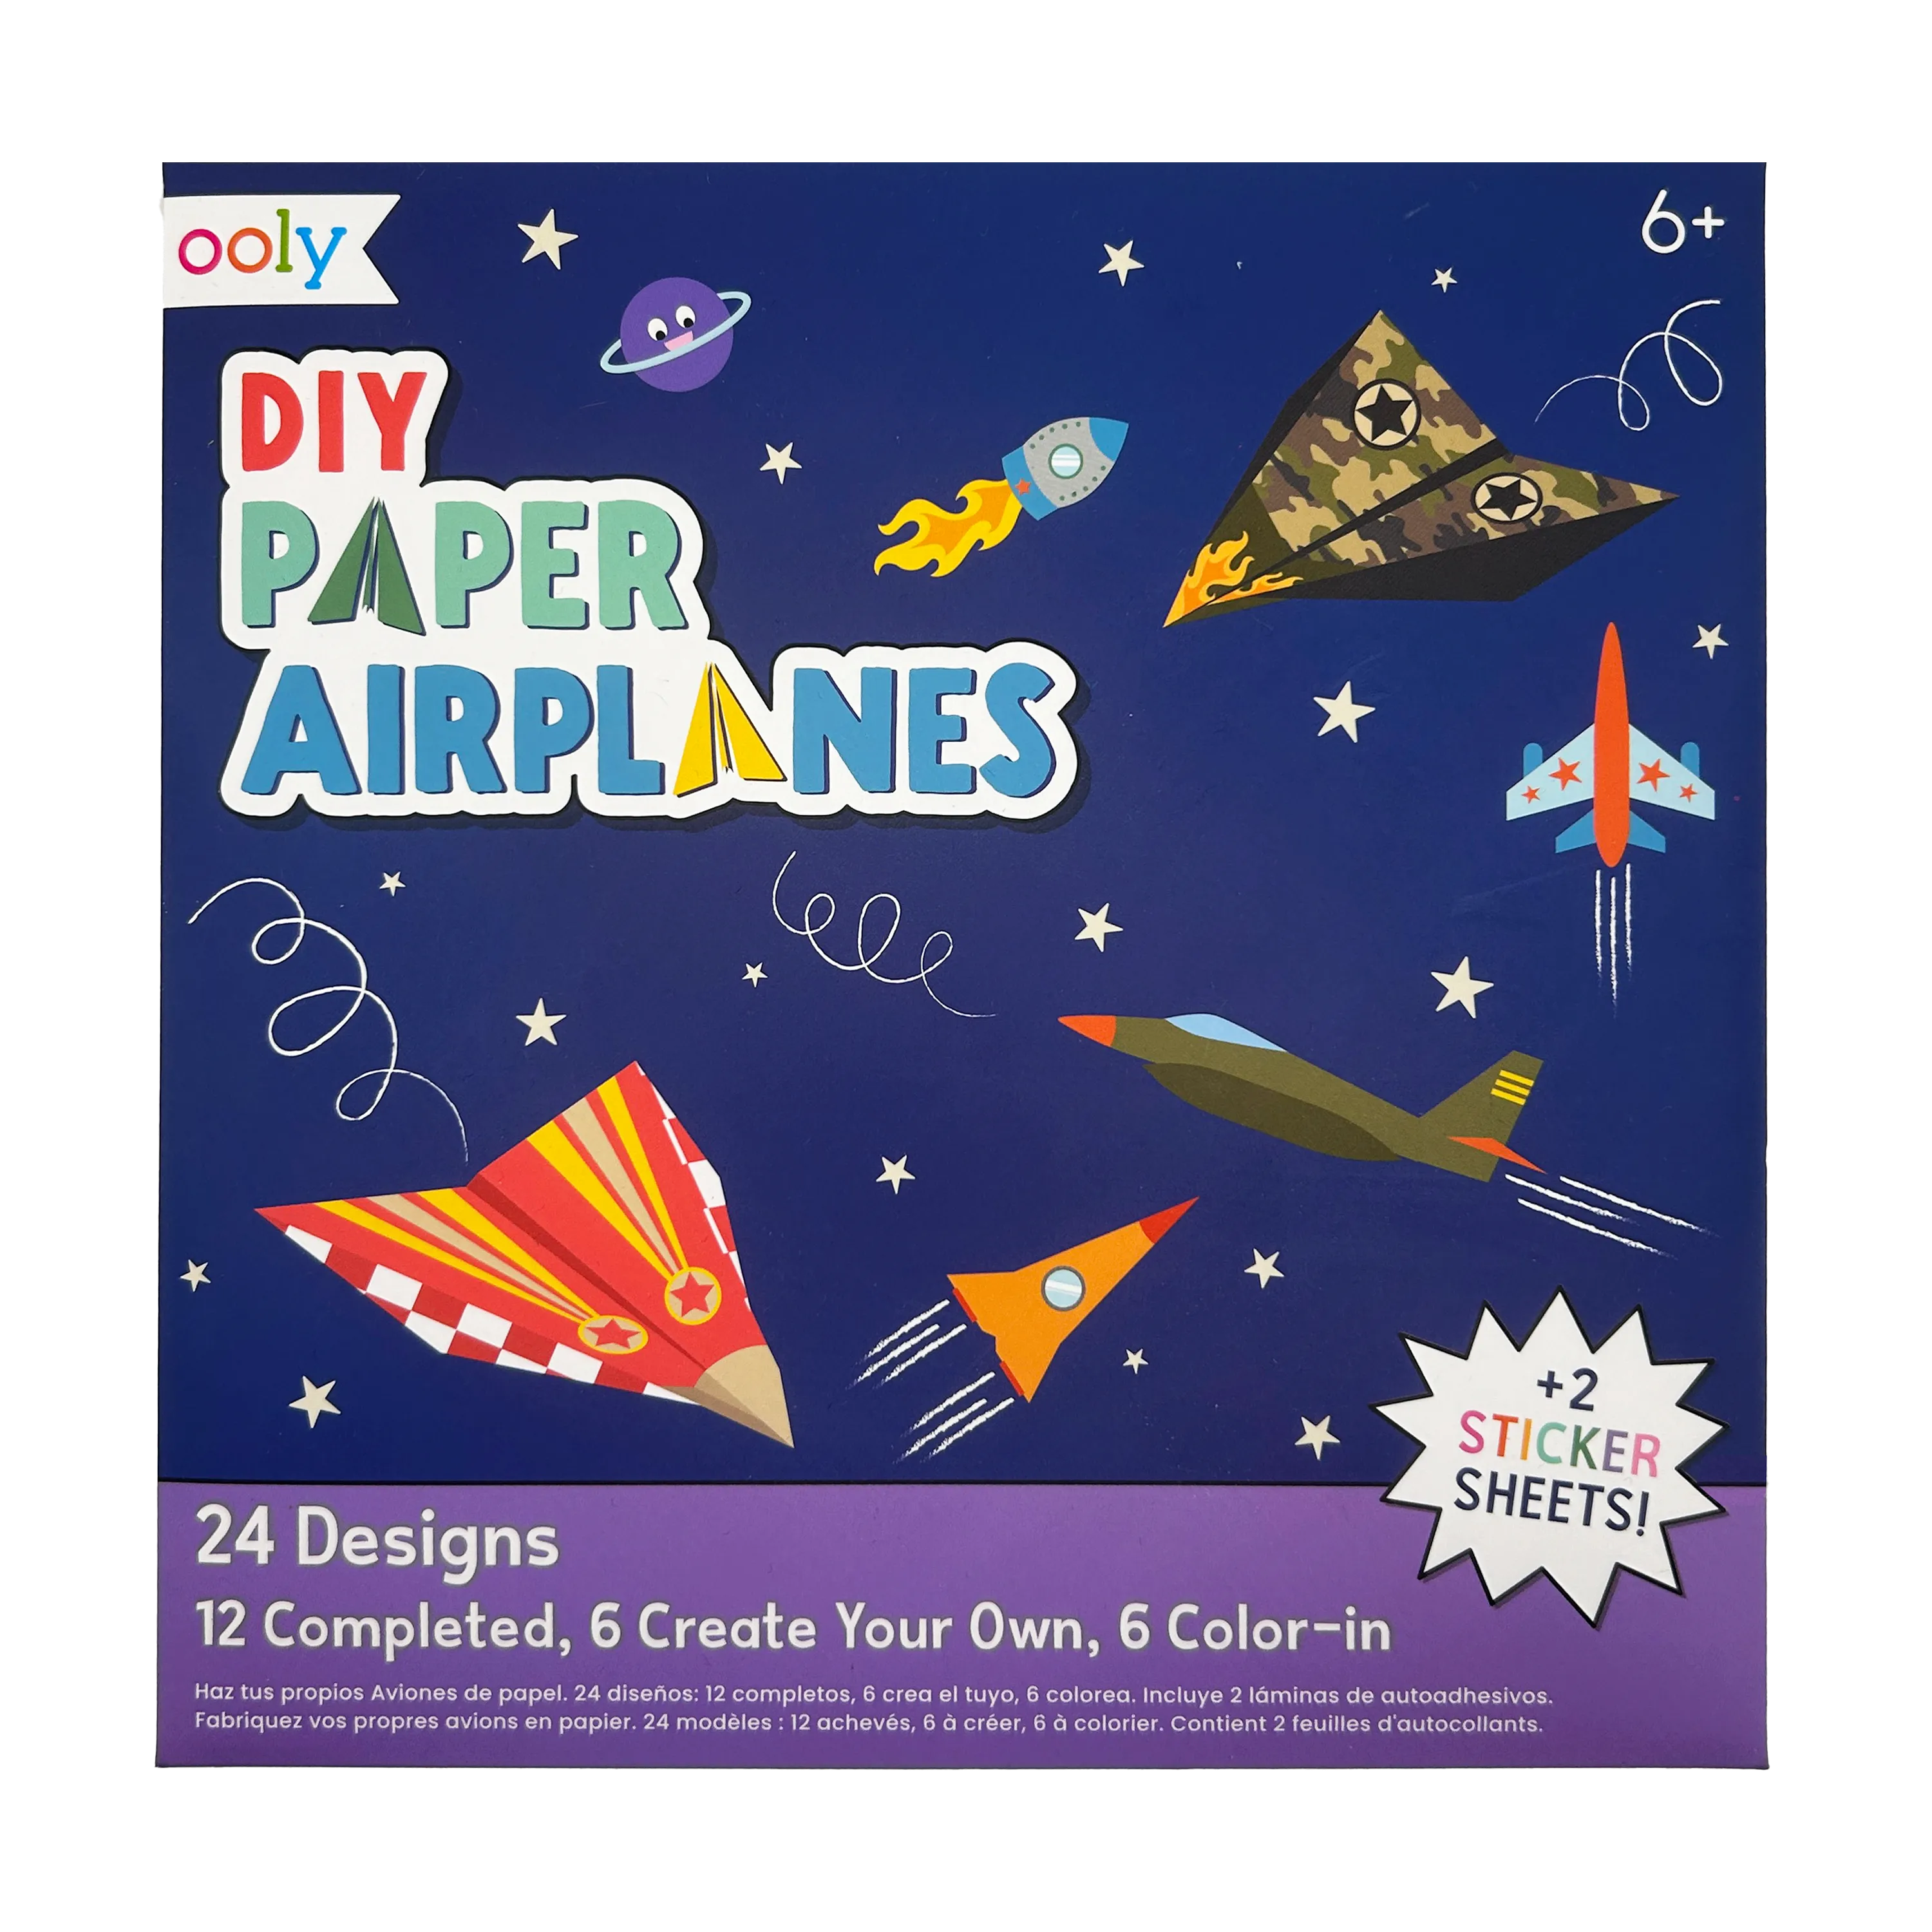 OOLY DIY Paper Airplanes Activity Kit front of packaging